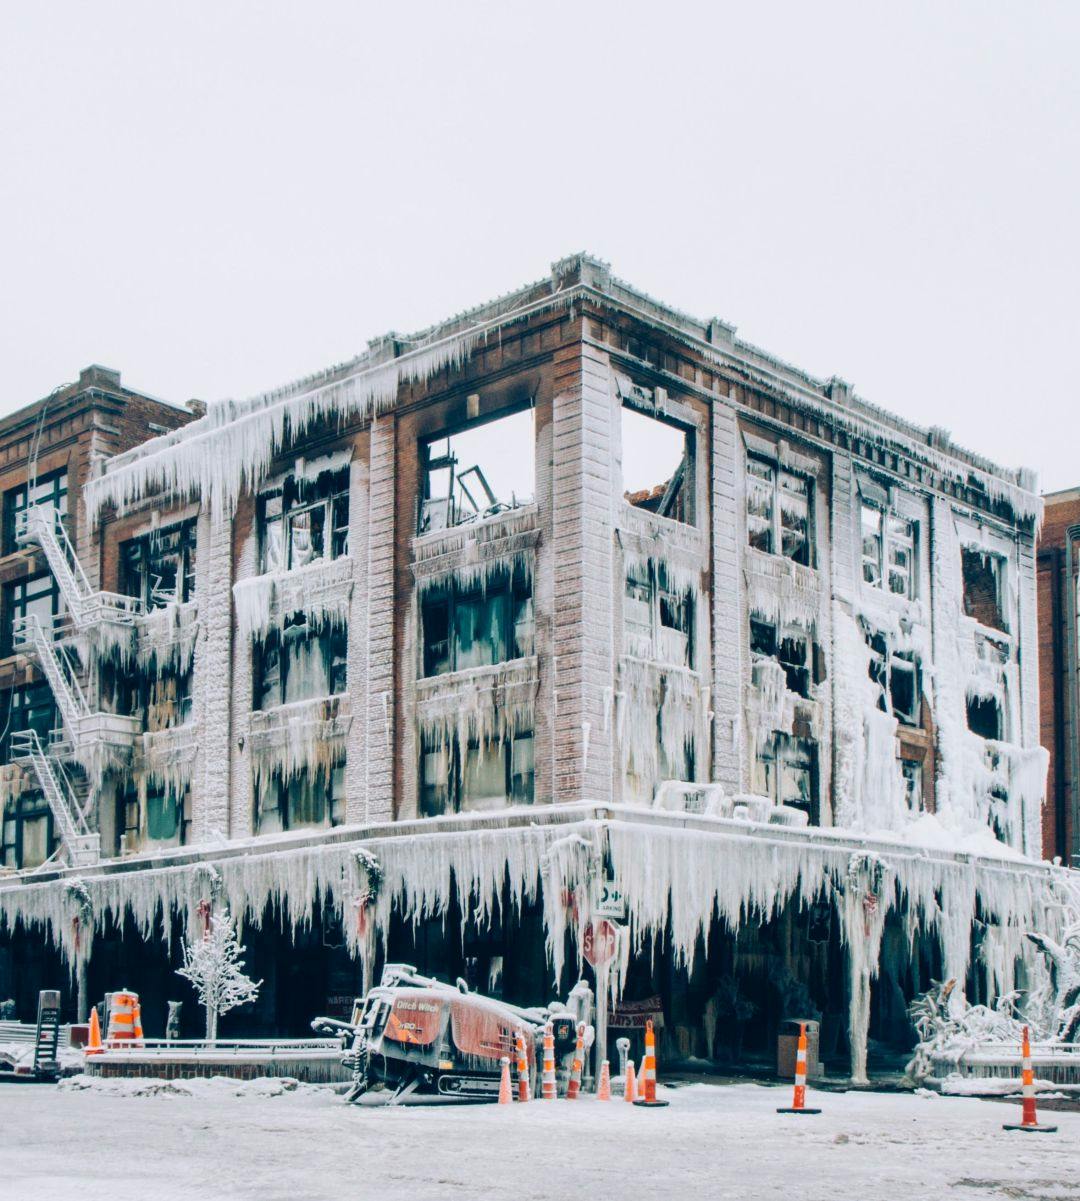 A Omaha building completely covered in ice and snow